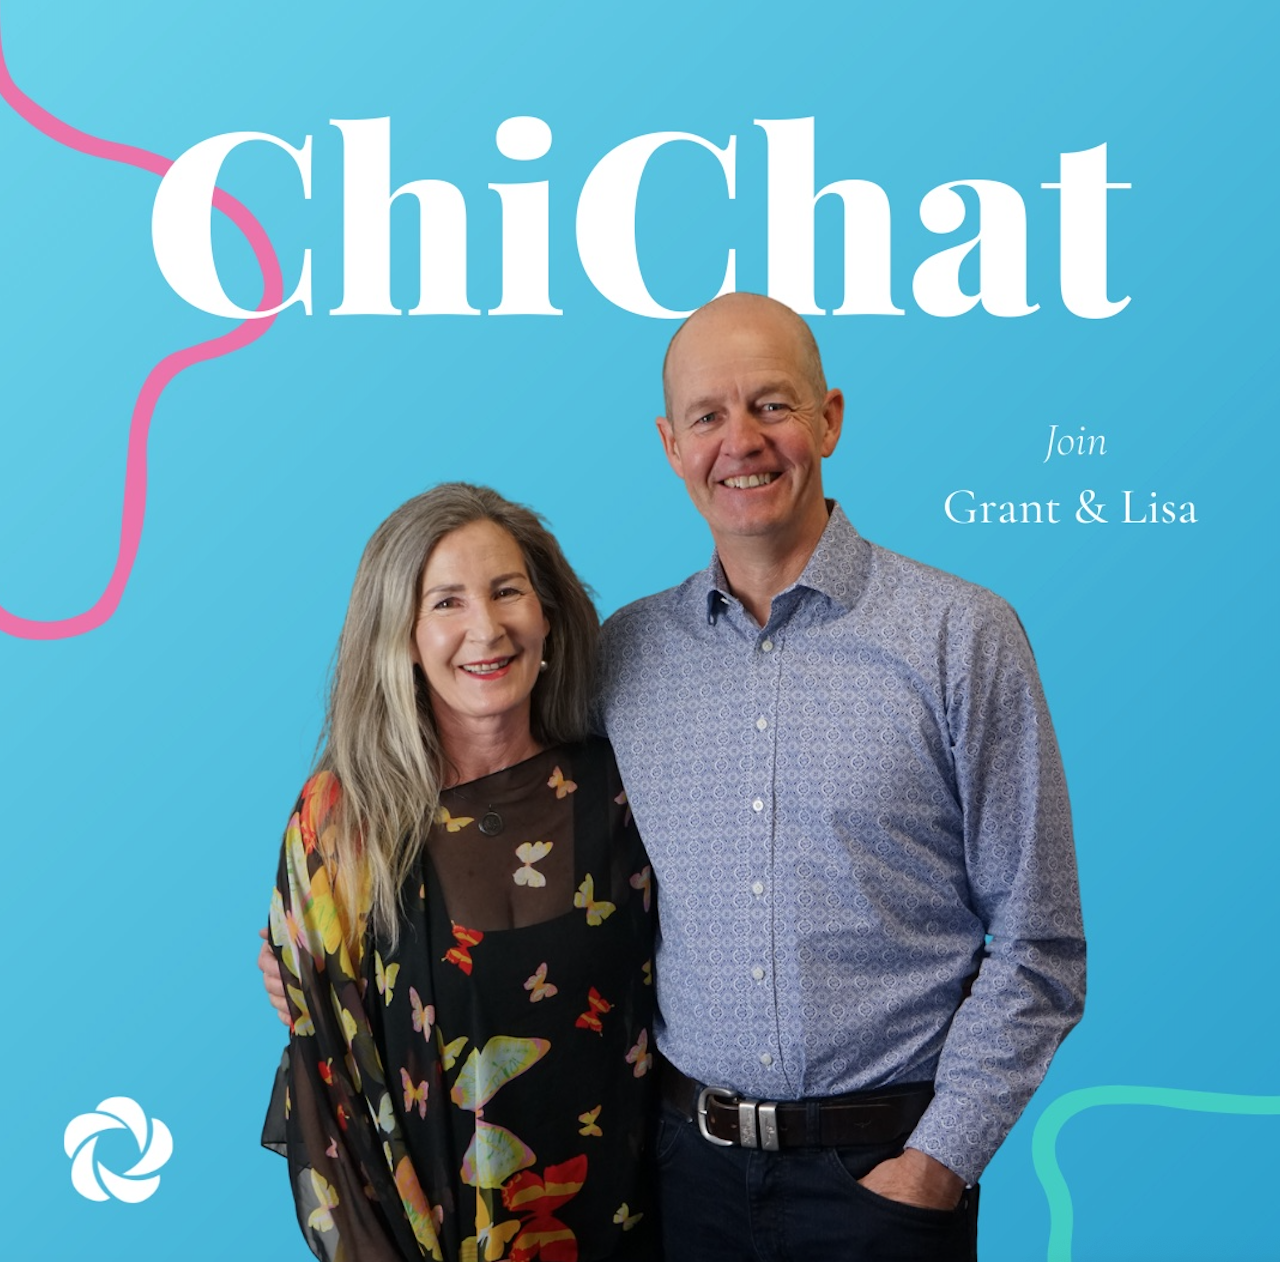 Use ChiChart to get ahead in business